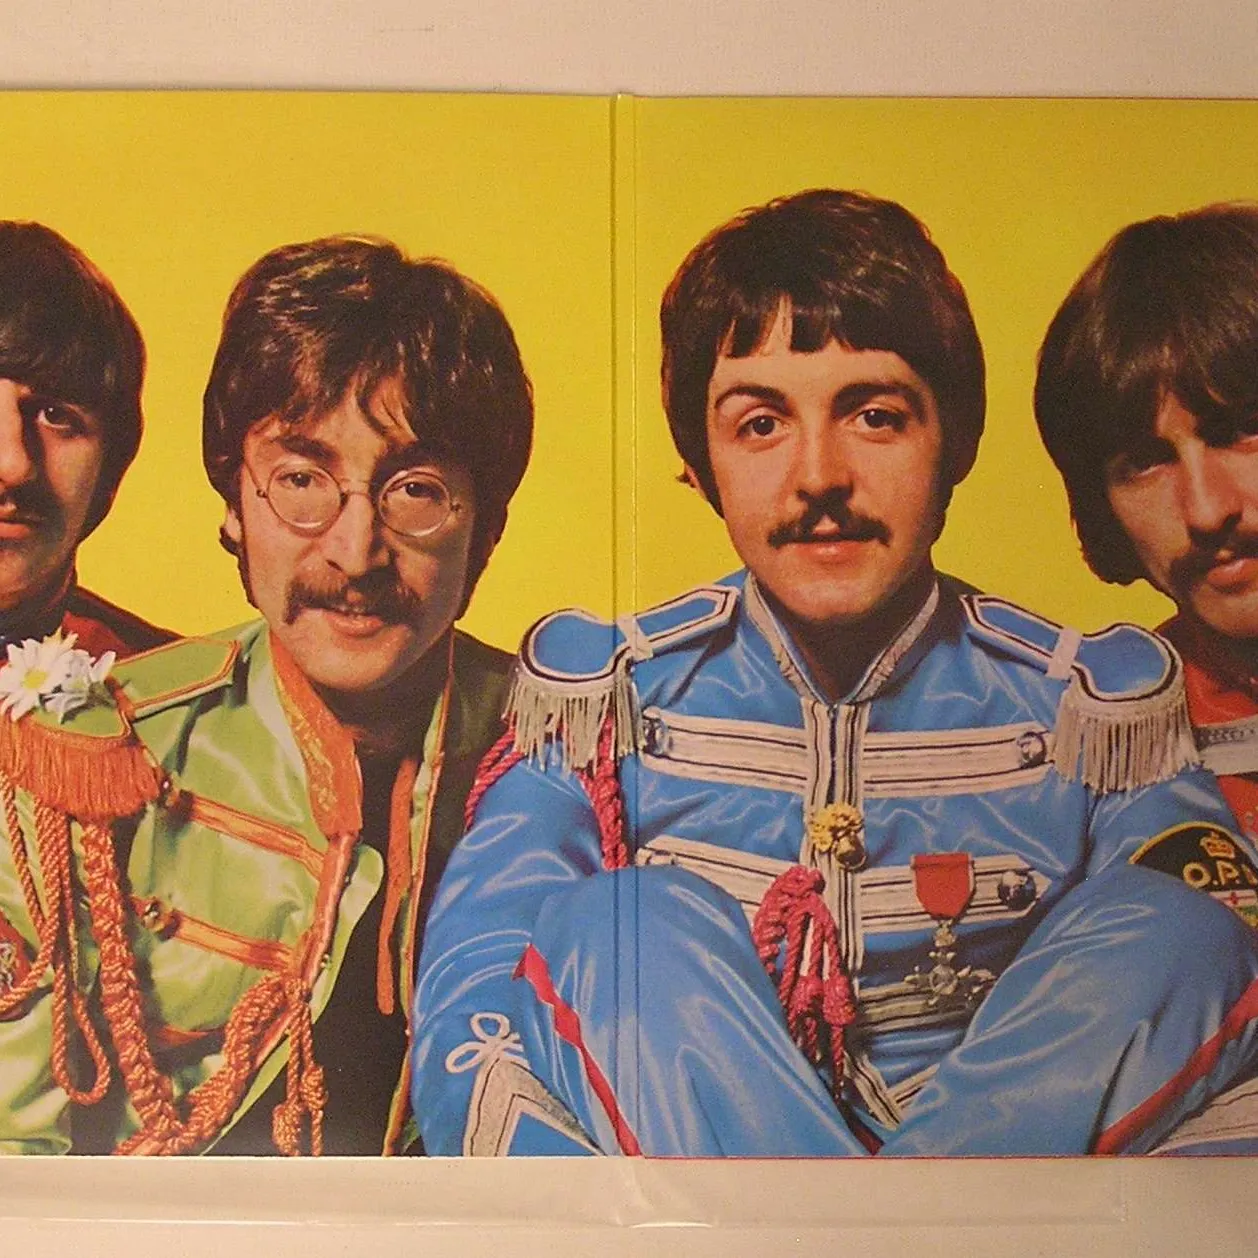 Sgt. Pepper's Lonely Hearts Club Band - Beatles, The (album) photo 3